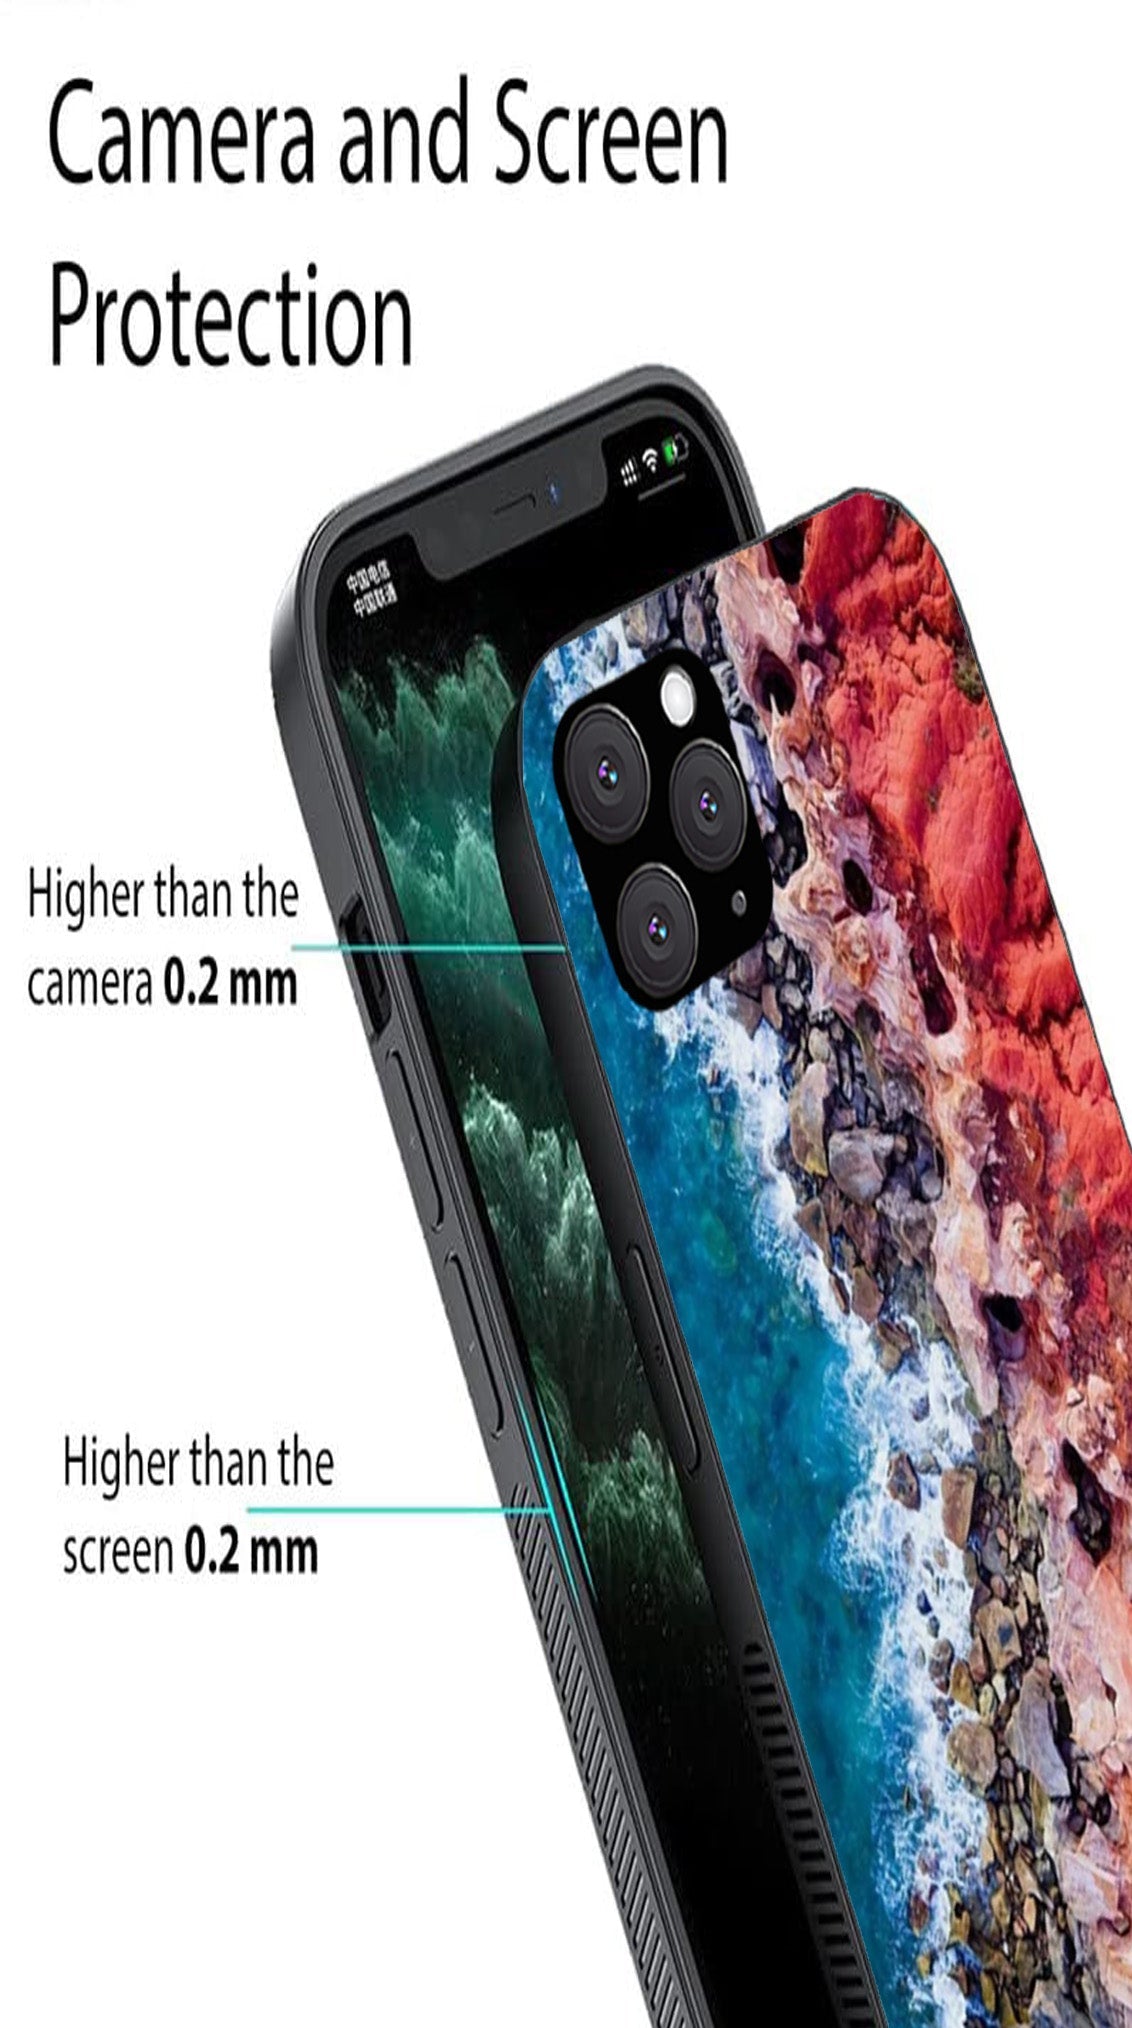 Sea Shore Metal Mobile Case for iPhone 11 Pro Max